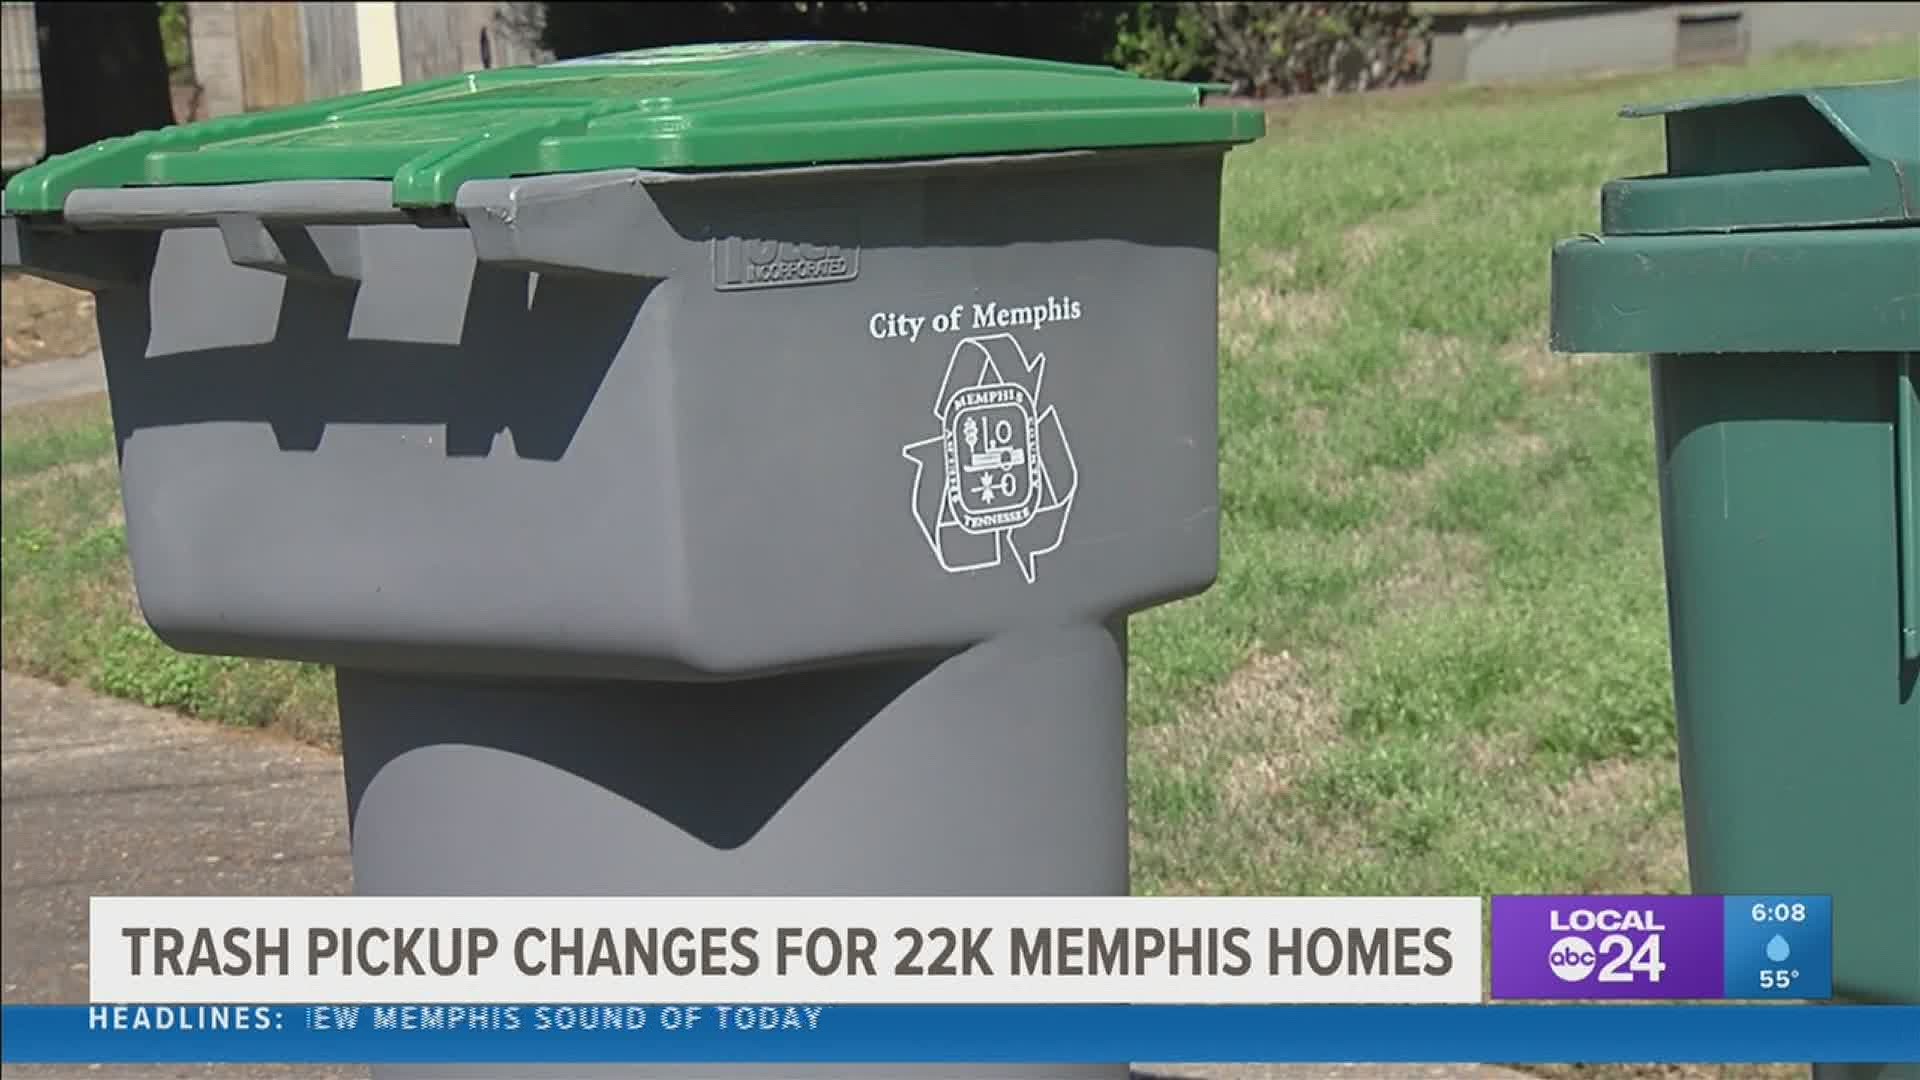 Find out if your garbage pickup is changing in Memphis